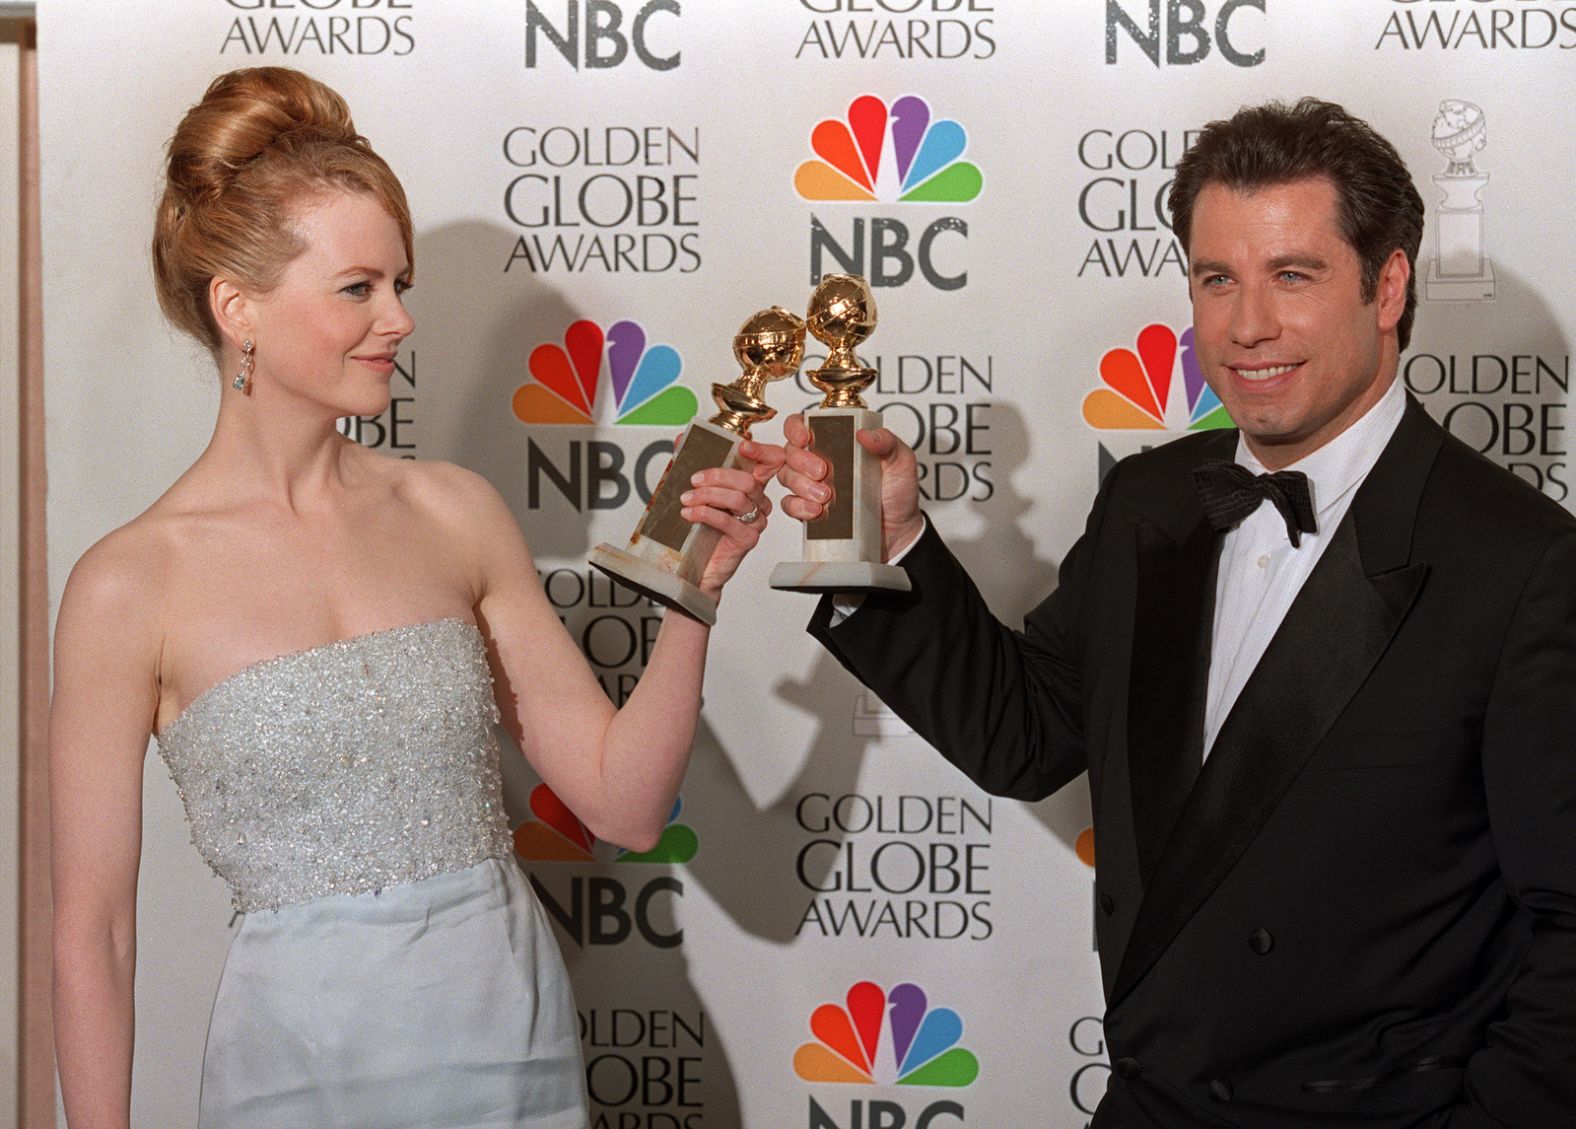 Kidman and John Travolta toast with the Golden Globe Awards they won in 1998. She won best actress in a comedy motion picture ("To Die For").